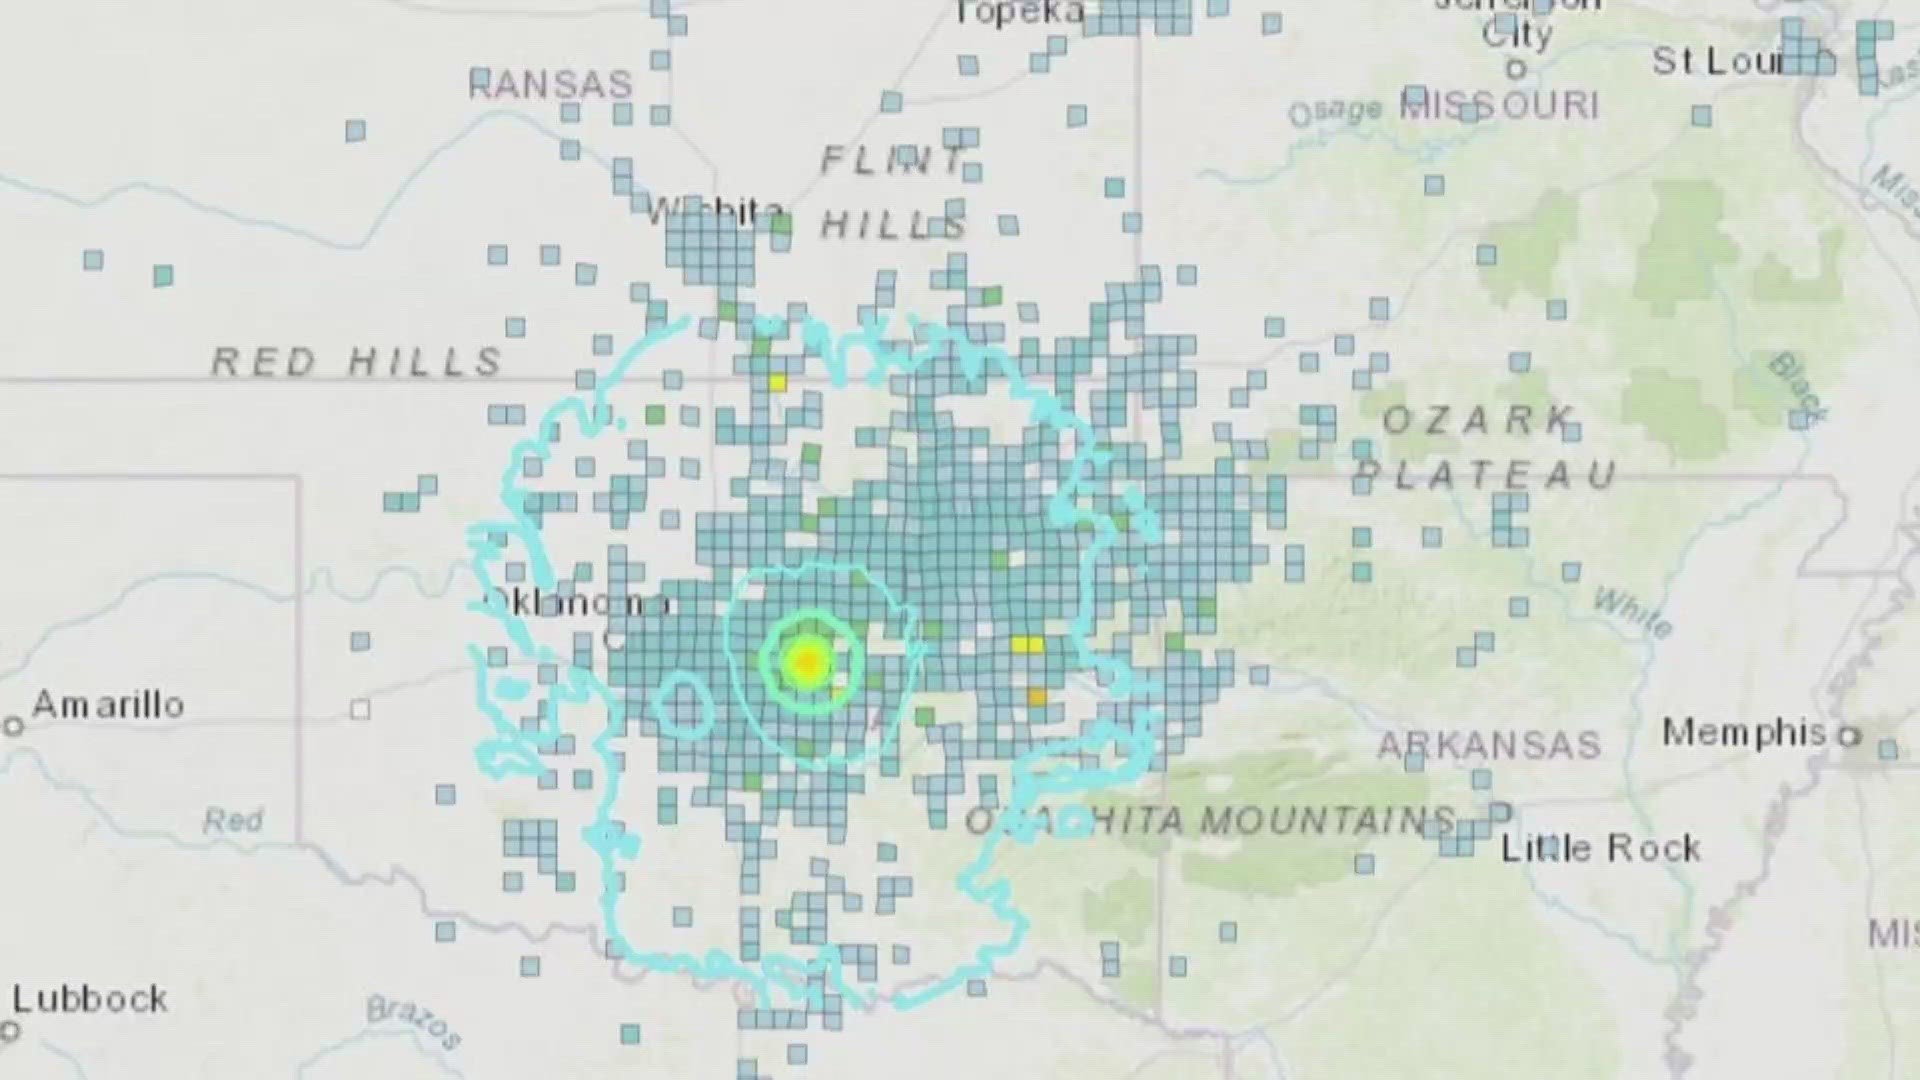 A live stream caught the moment a 5.1 magnitude earthquake hit Oklahoma, with shaking being felt as far as central Arkansas.